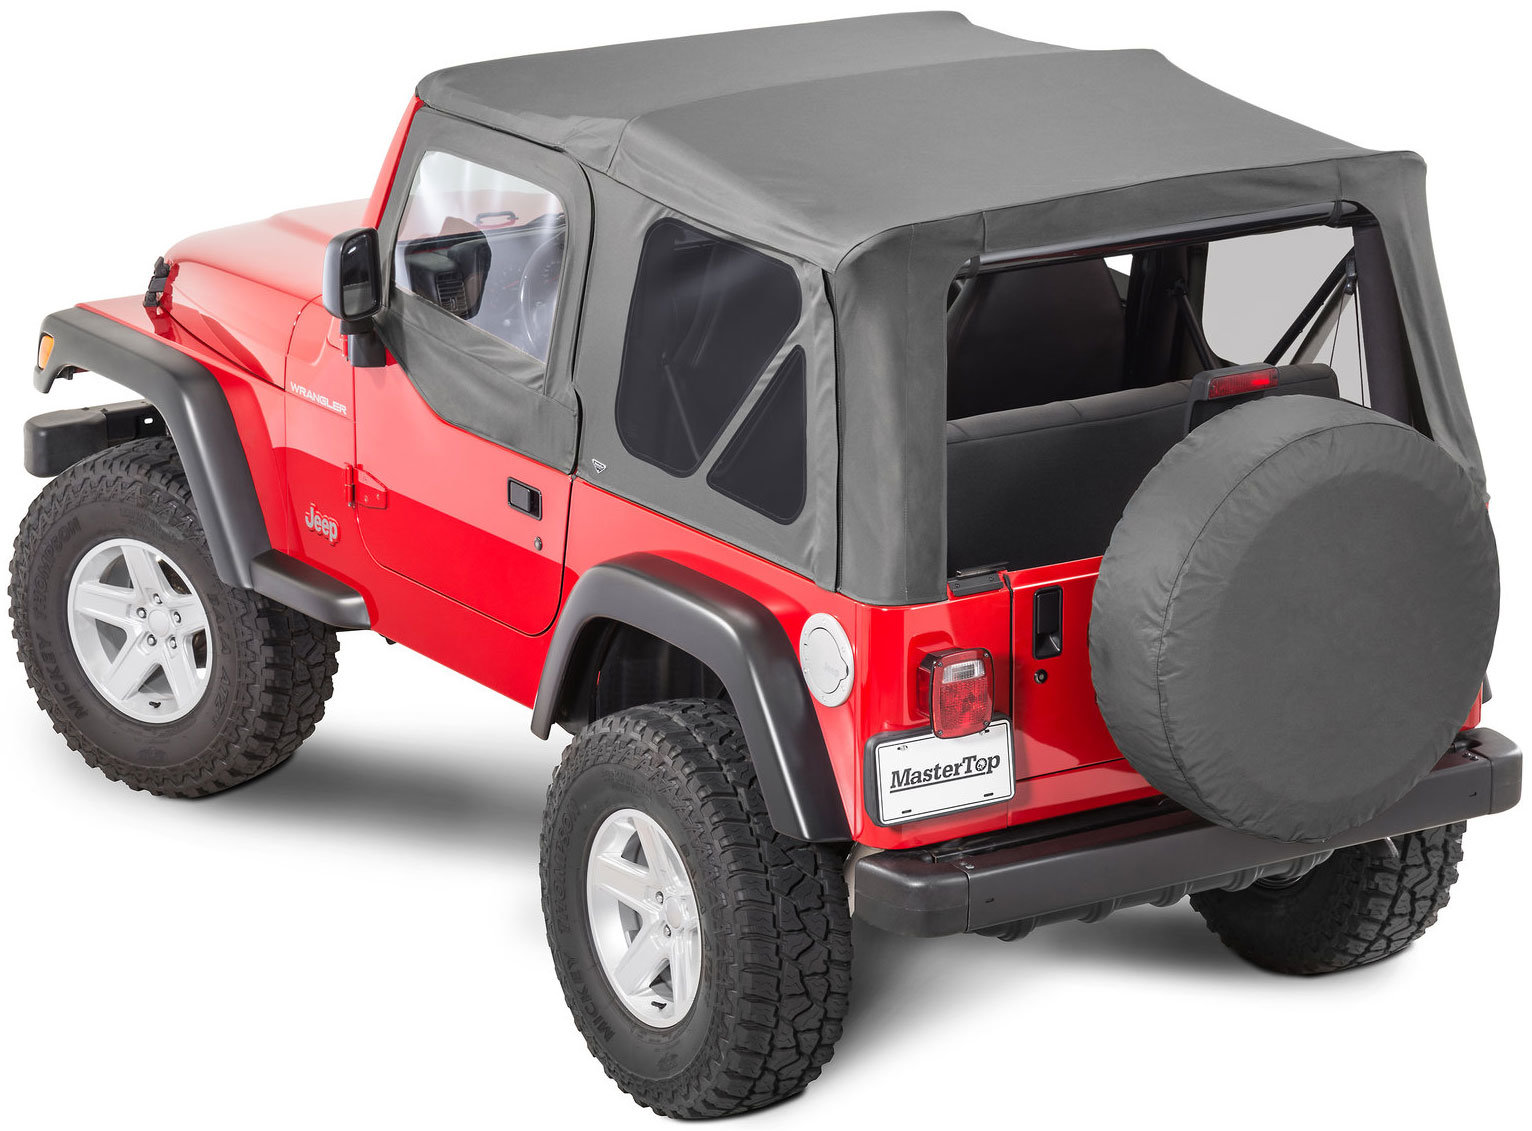 MasterTop Complete Soft Top Kit with Upper Doors for 97-06 Jeep Wrangler TJ  | Quadratec